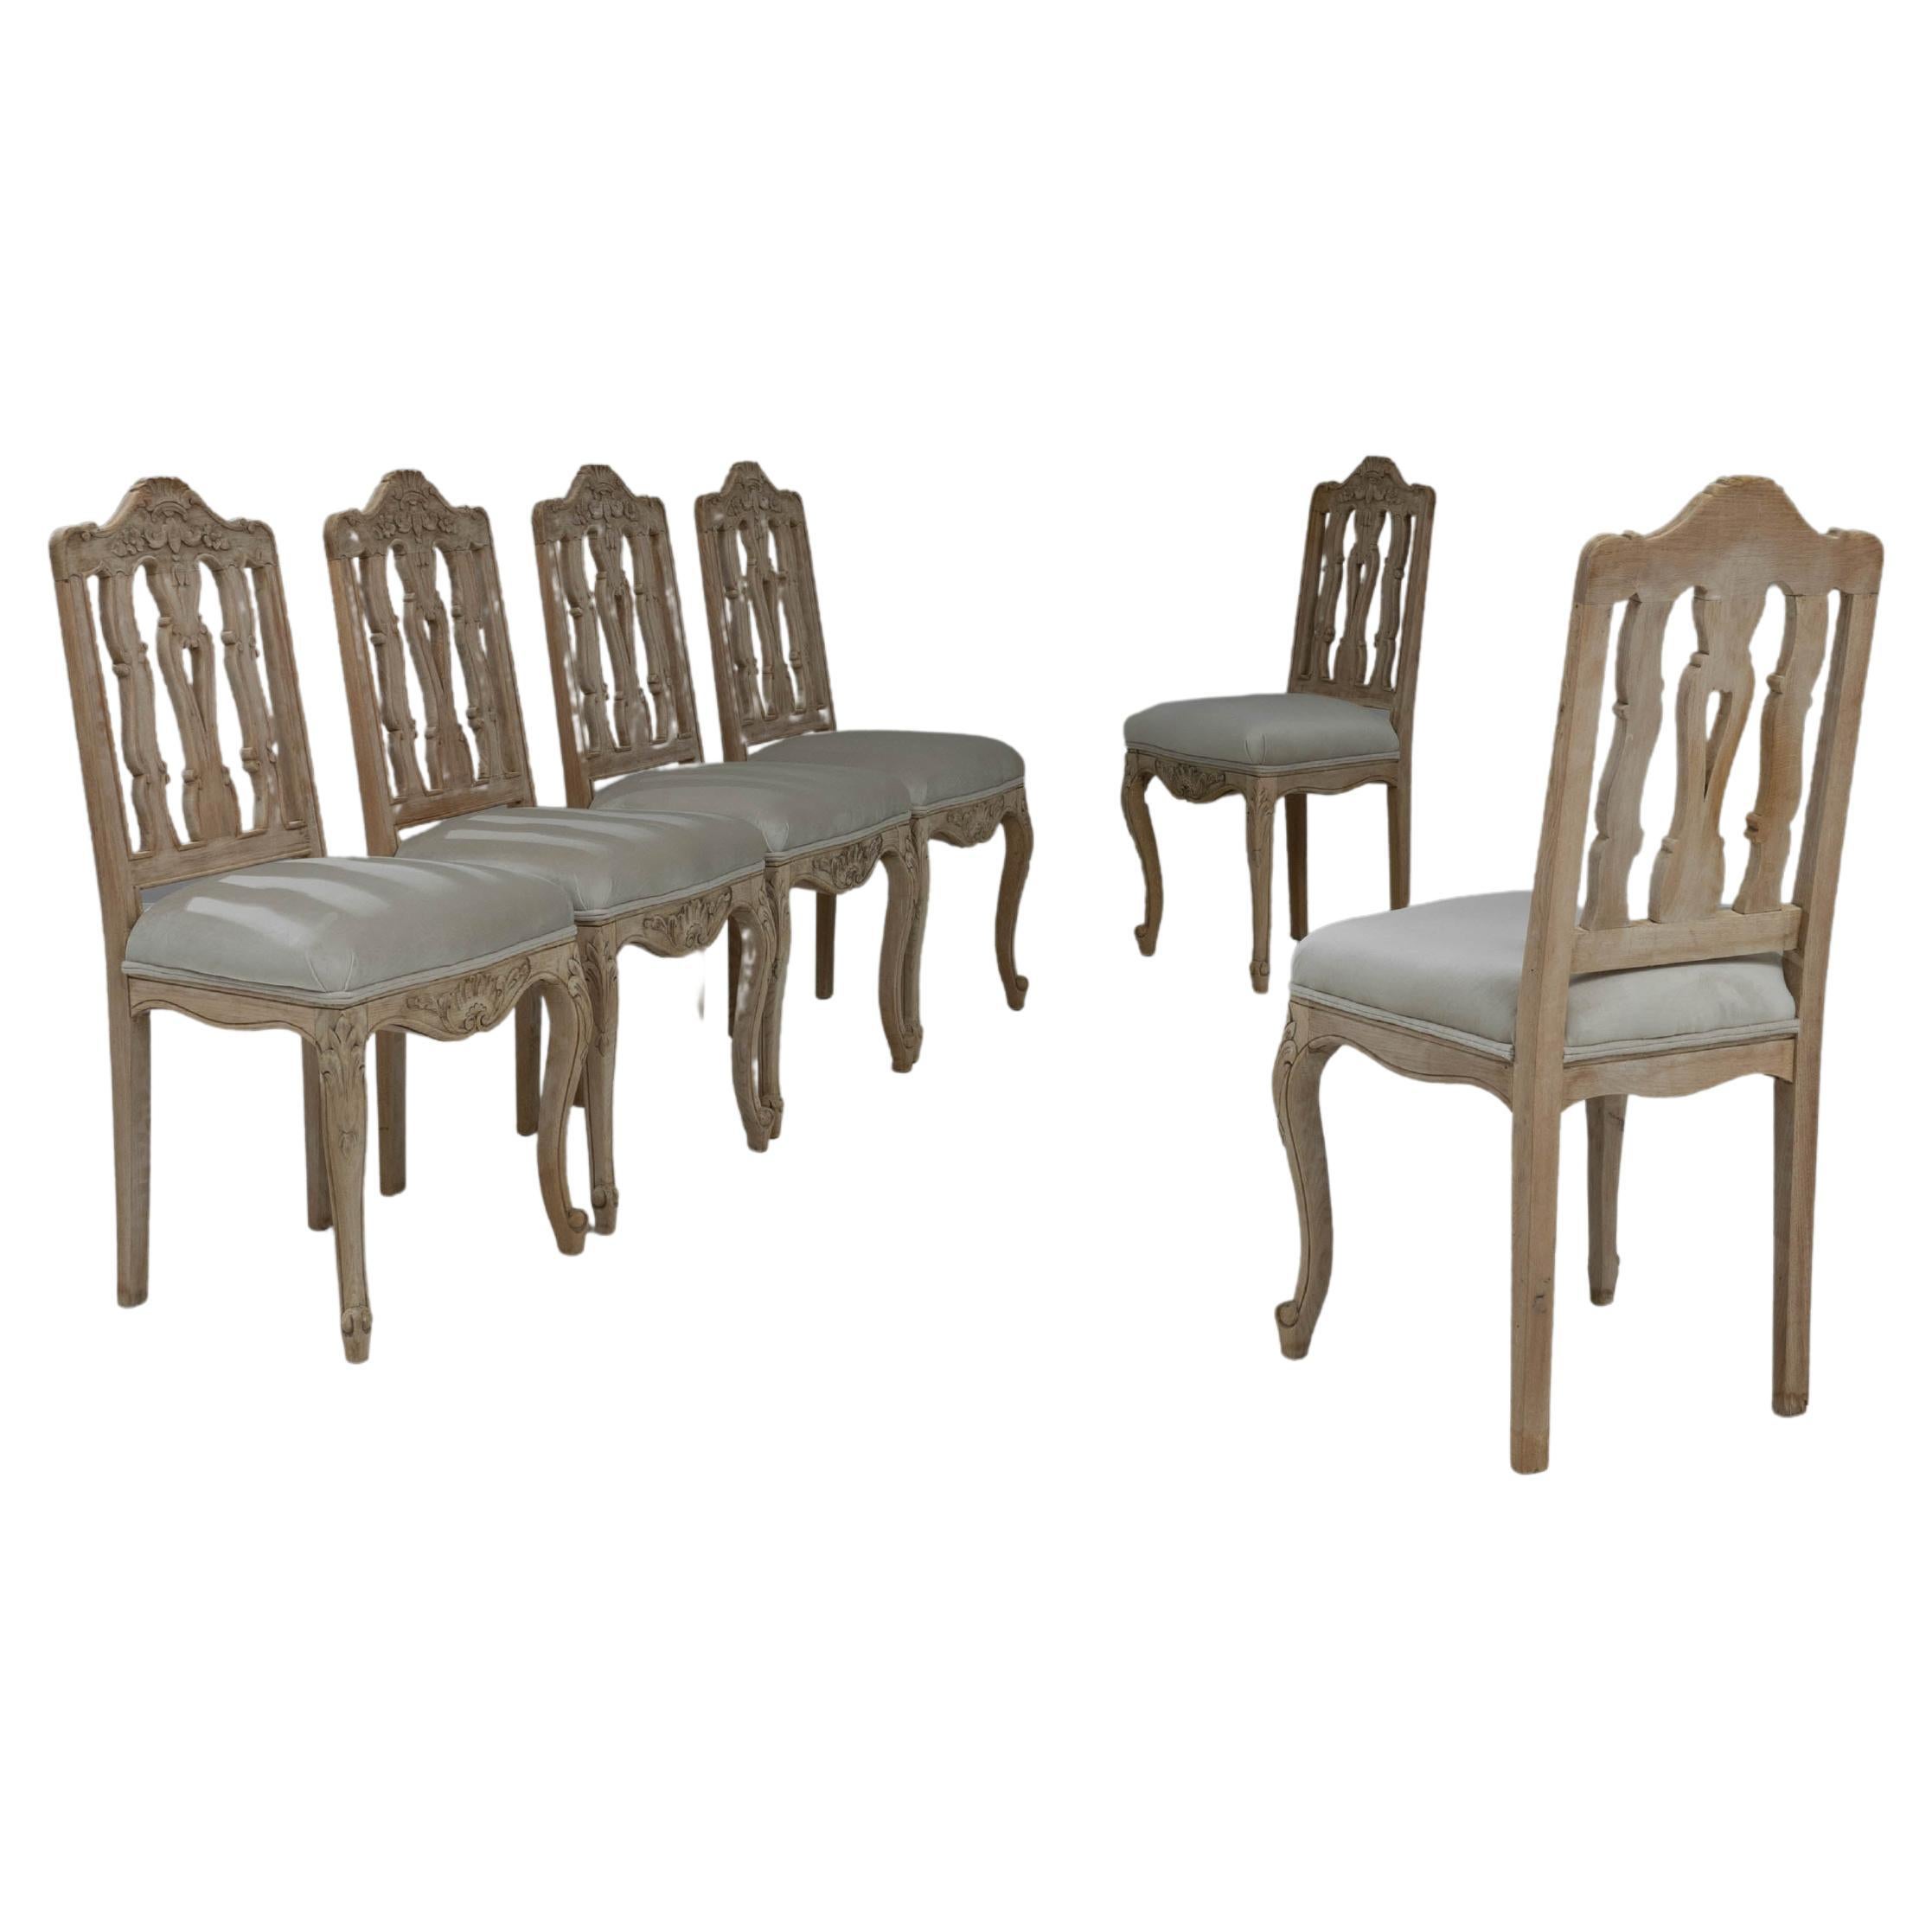 20th Century French Bleached Oak Dining Chairs With Upholstered Seats, Set of 6 For Sale